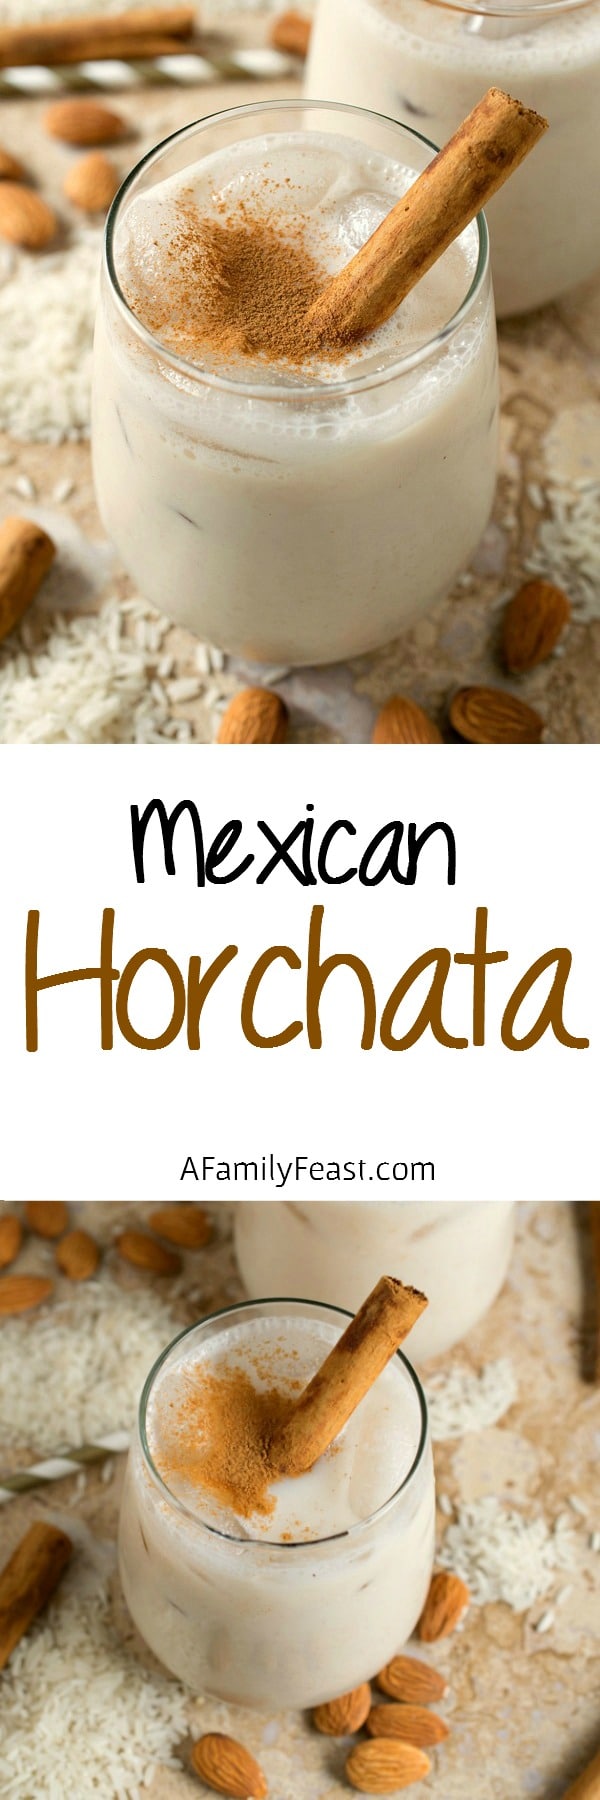 Horchata - A refreshing and lightly sweet Mexican rice and almond beverage flavored with cinnamon. Delicious!